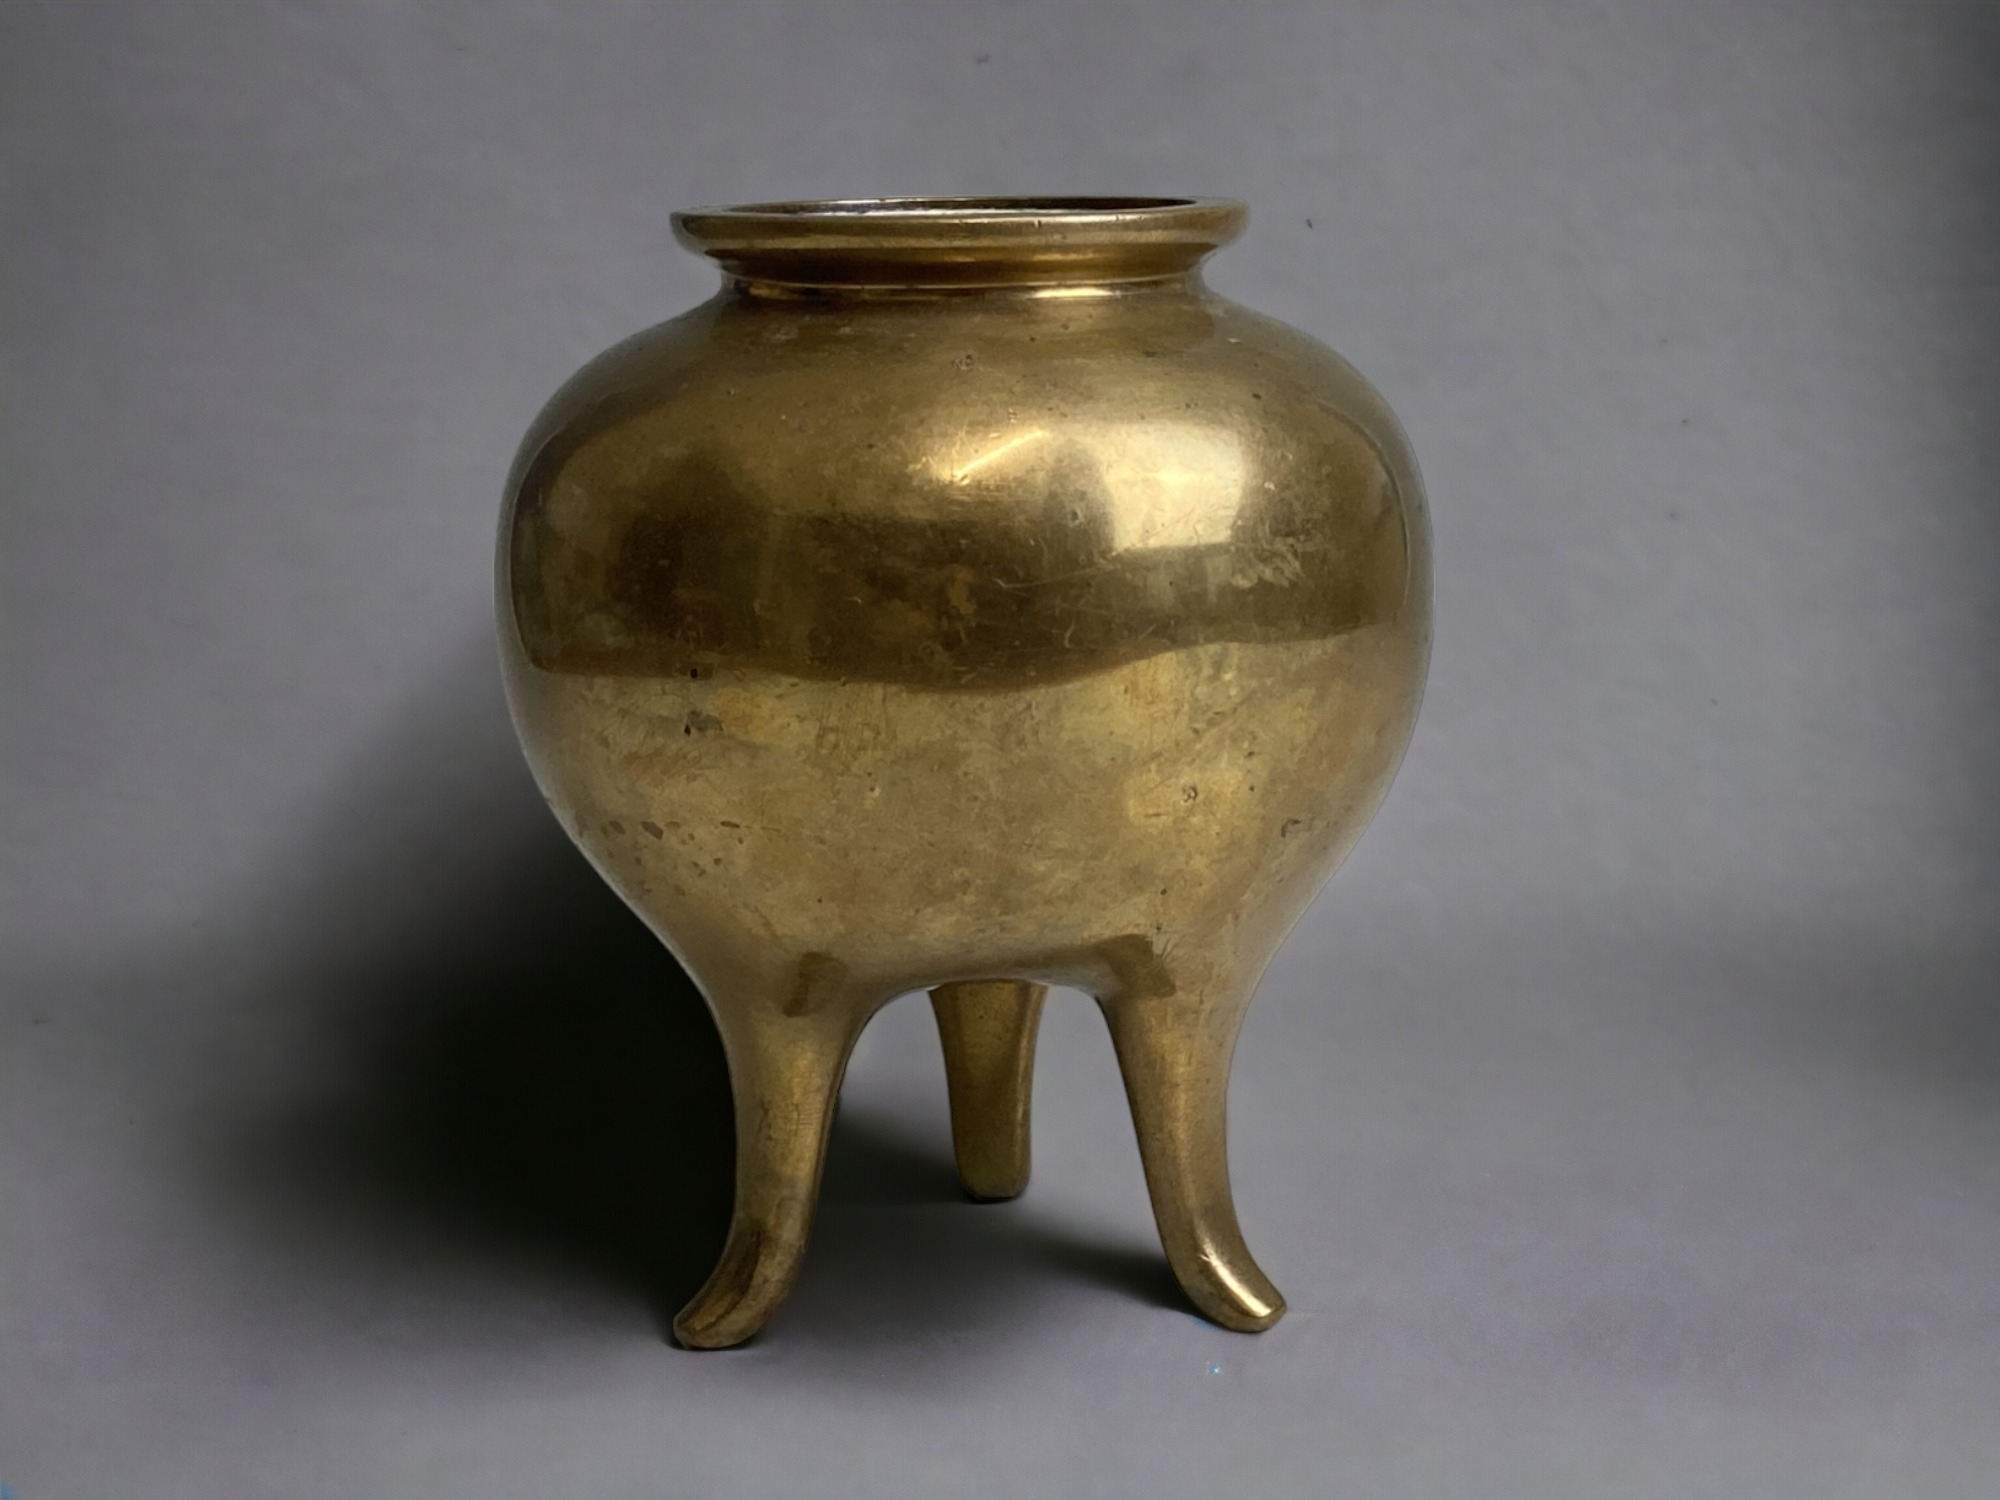 A CHINESE GILT BRONZE TRIPOD CENSER. CURVED TRIPOD LEGS WITH ROUND BODY. MARKED TO BASE. HEIGHT - - Image 2 of 4